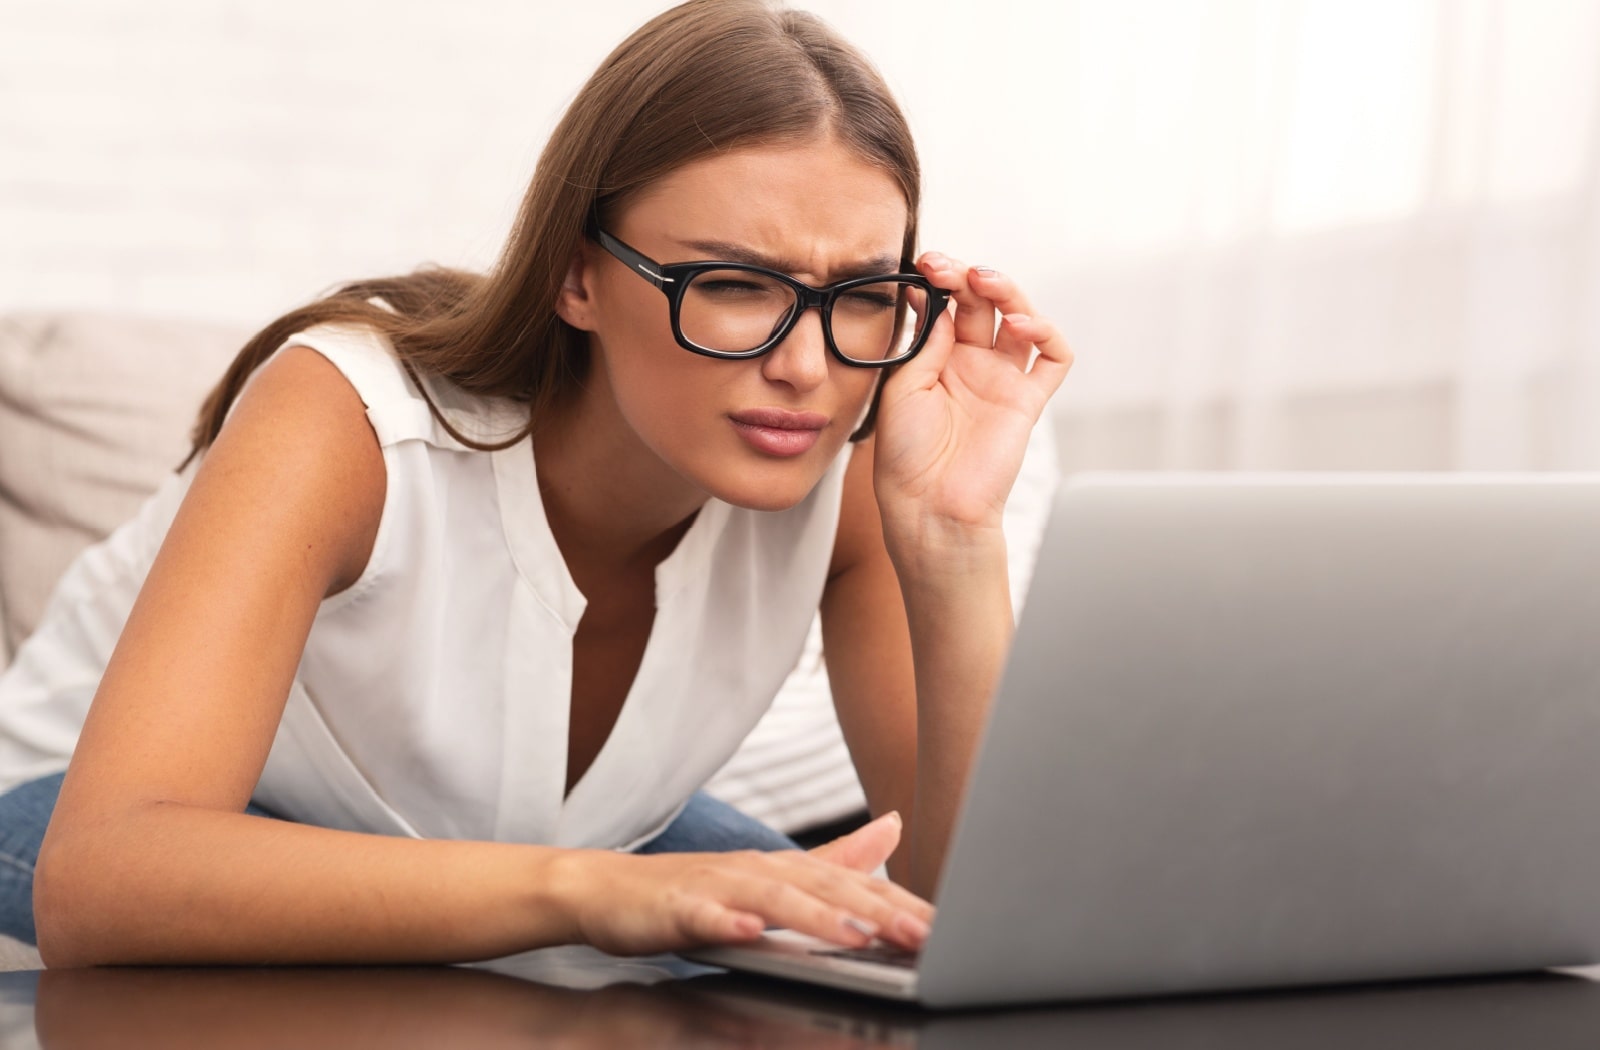 A woman with glasses looking at her laptop but she's struggling to see it clearly due to vision issues